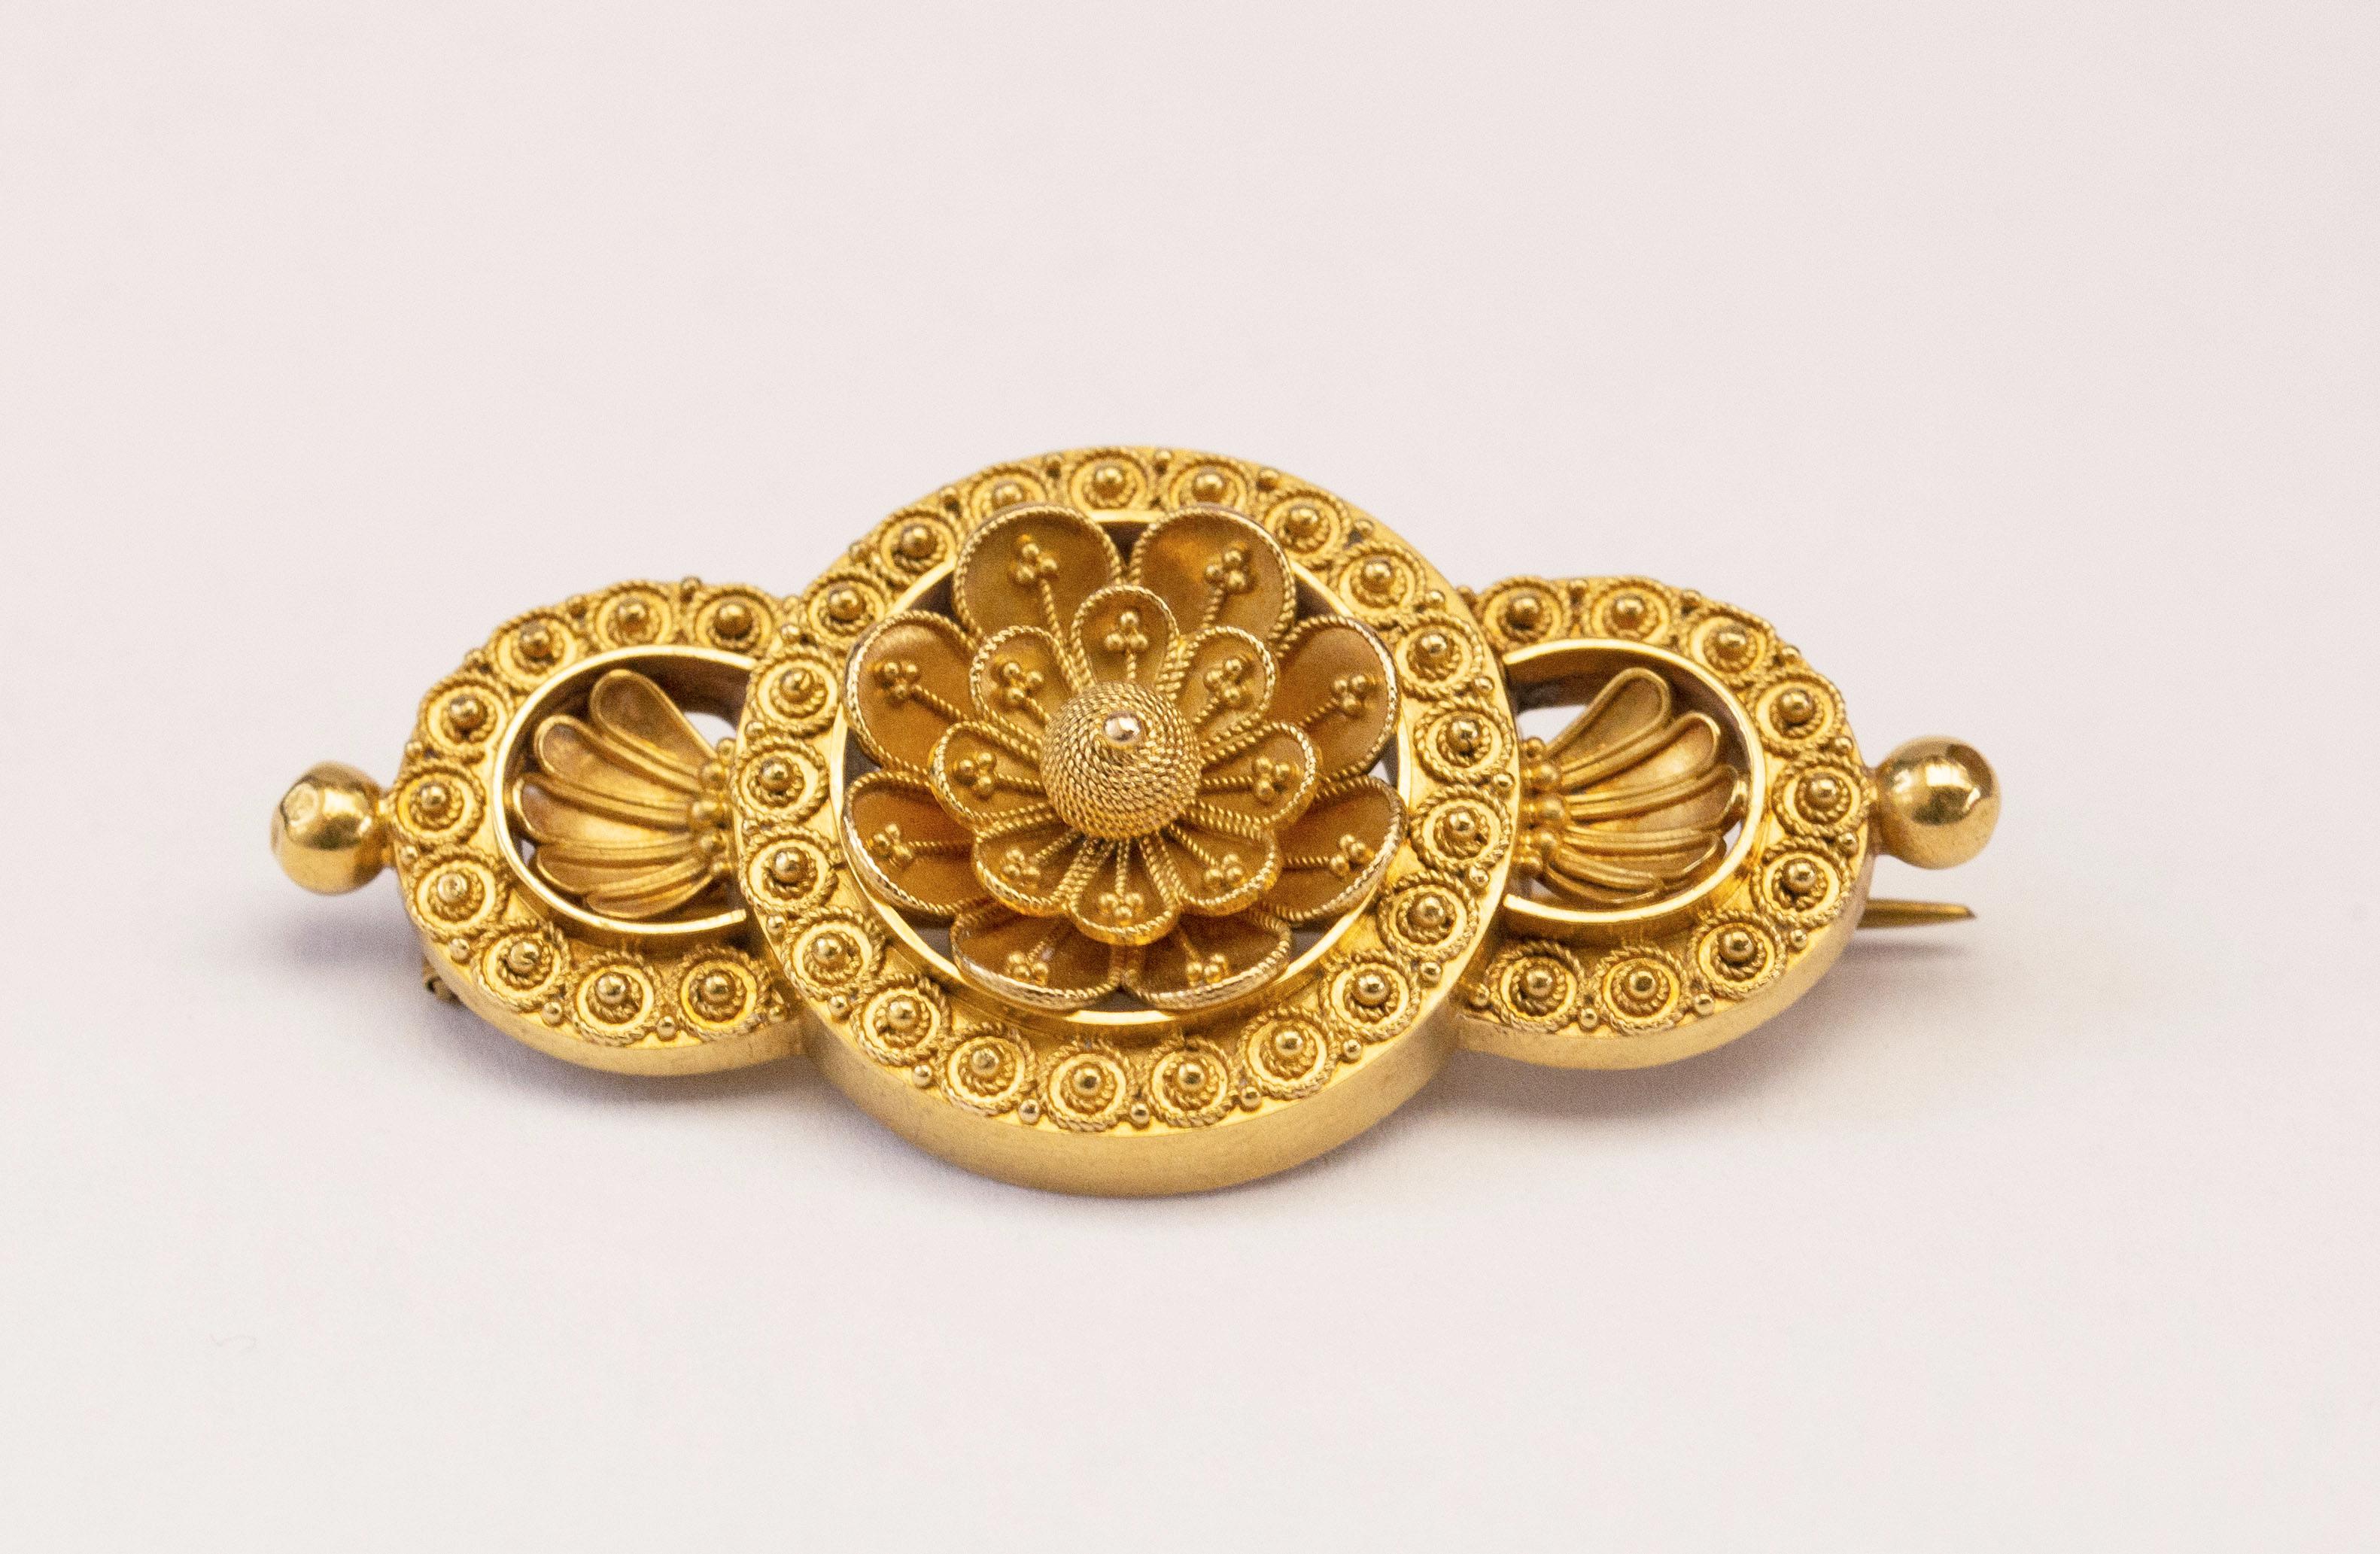 Victorian Etruscan Revival 15 Karat Yellow Gold Filigree Brooch In Good Condition For Sale In Arnhem, NL